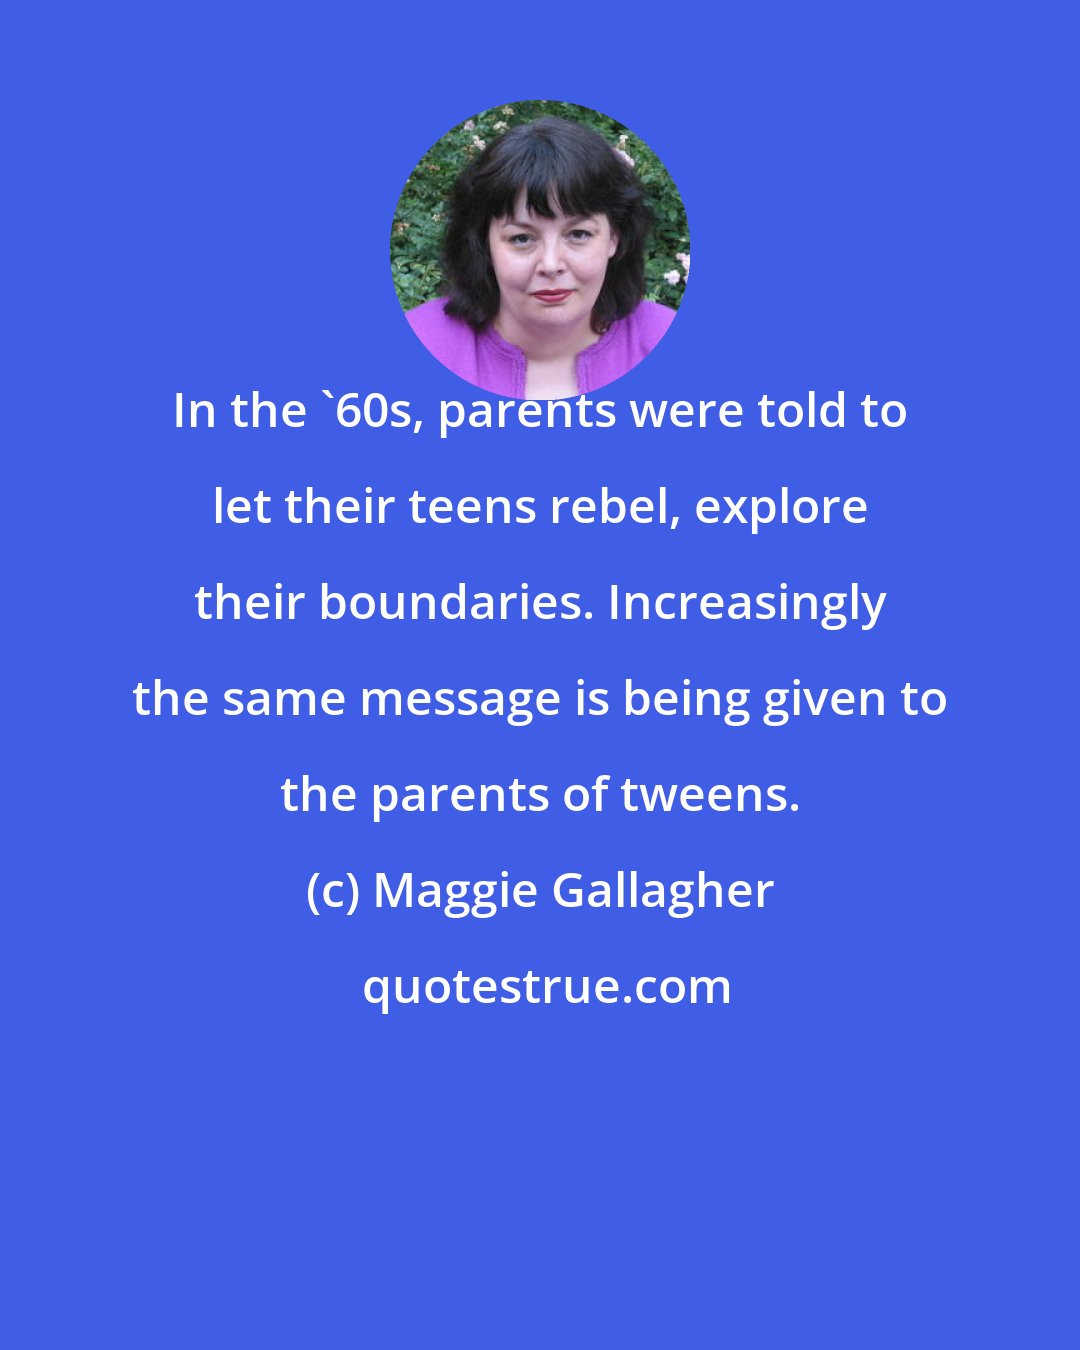 Maggie Gallagher: In the '60s, parents were told to let their teens rebel, explore their boundaries. Increasingly the same message is being given to the parents of tweens.